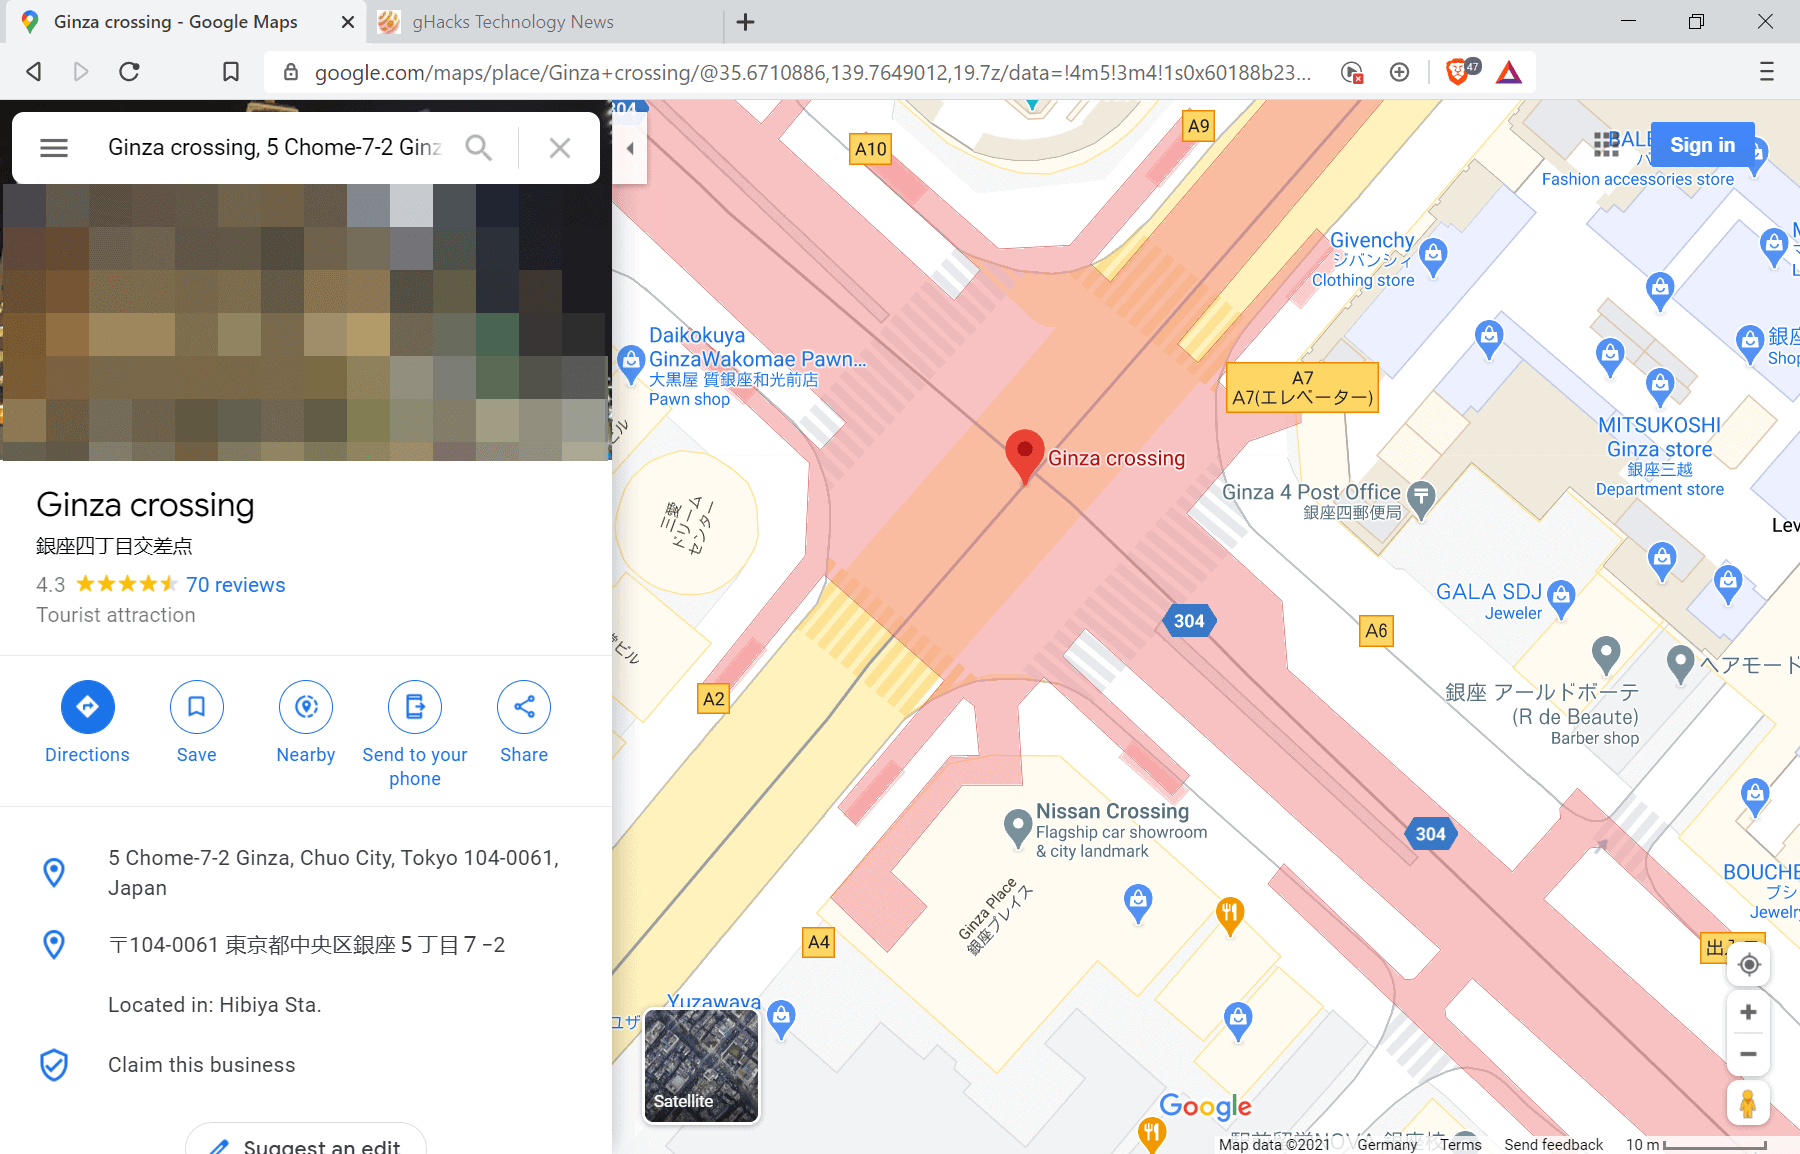 Google is adding crosswalks and other details to Google Maps